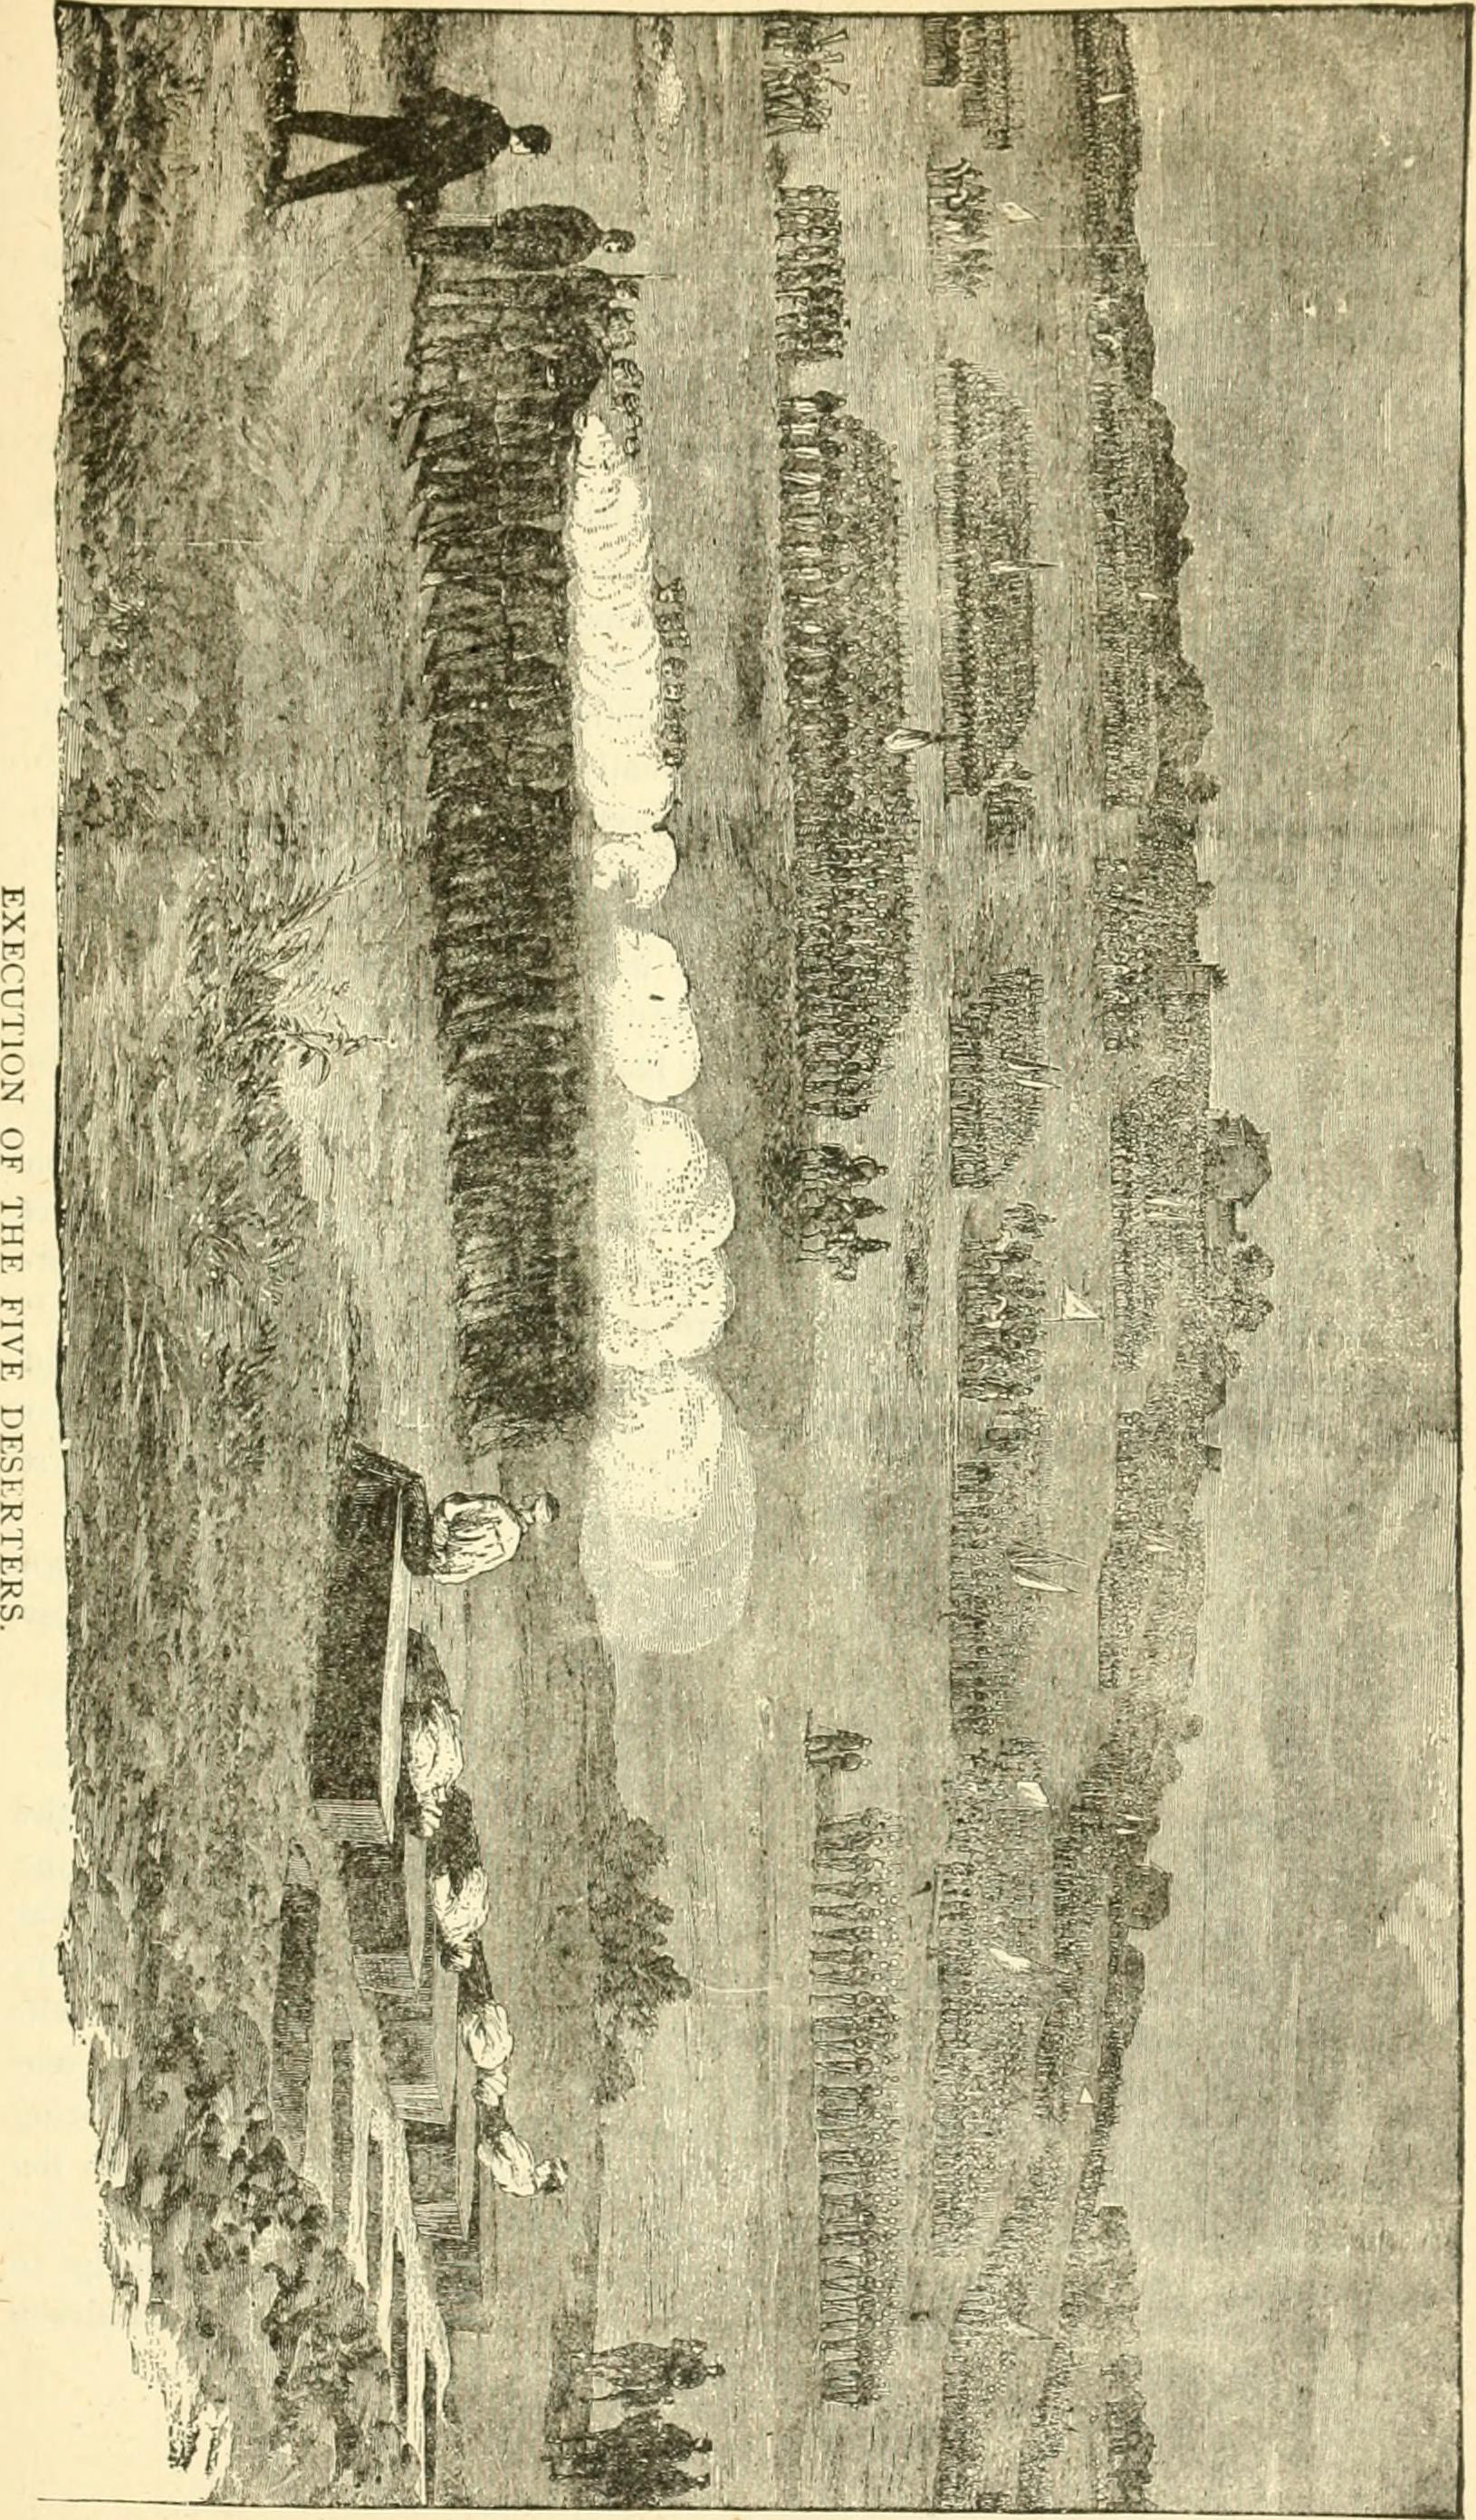 Image from page 354 of "History of the Corn Exchange Regiment, 118th Pennsylvania Volunteers, from their first engagement at Antietam to Appomattox. To which is added a record of its organization and a complete roster. Fully illustrated with maps, portrai